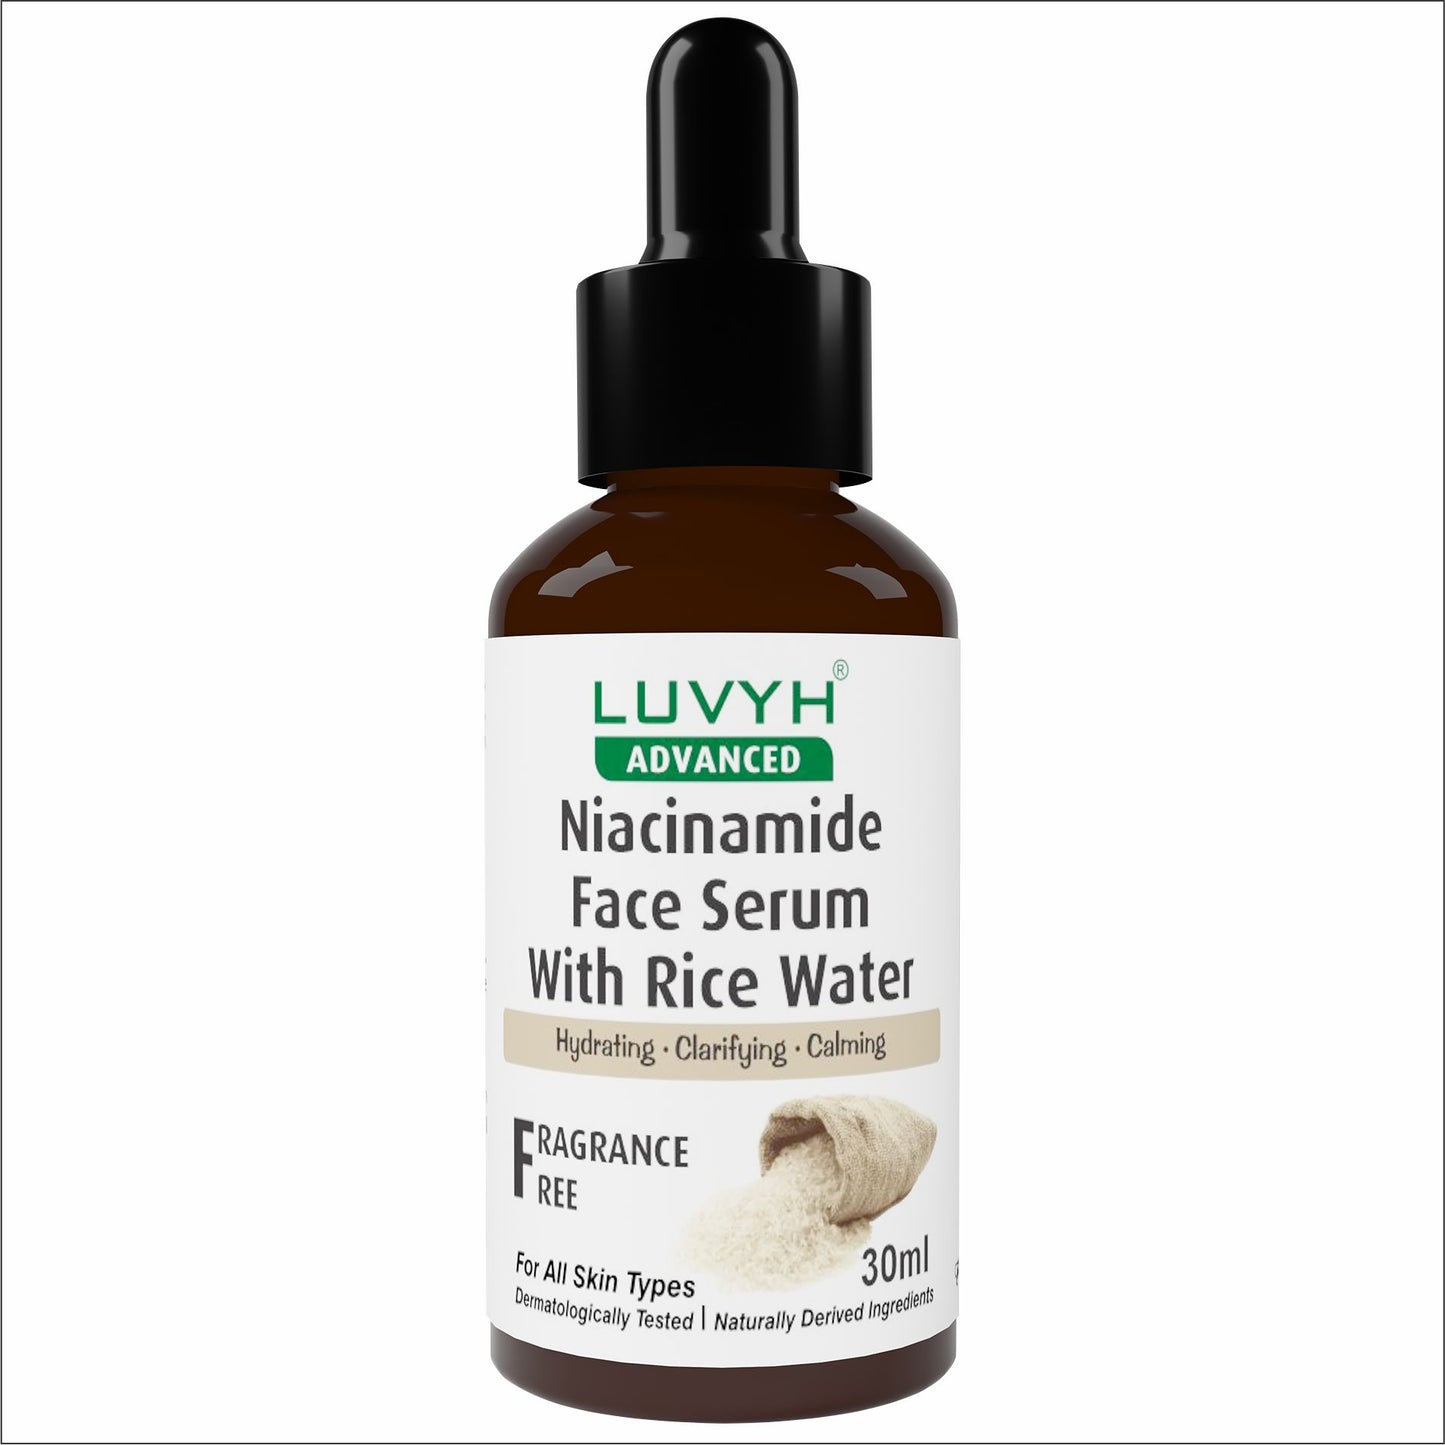 Luvyh Niacinamide Face Serum with Rice Water, Vitamin B3 with Japanese Fermented Rice Water, For Clear, Blemish-Free, Bright Skin, Suits All Skin Types, Fragrance-Free 30ML